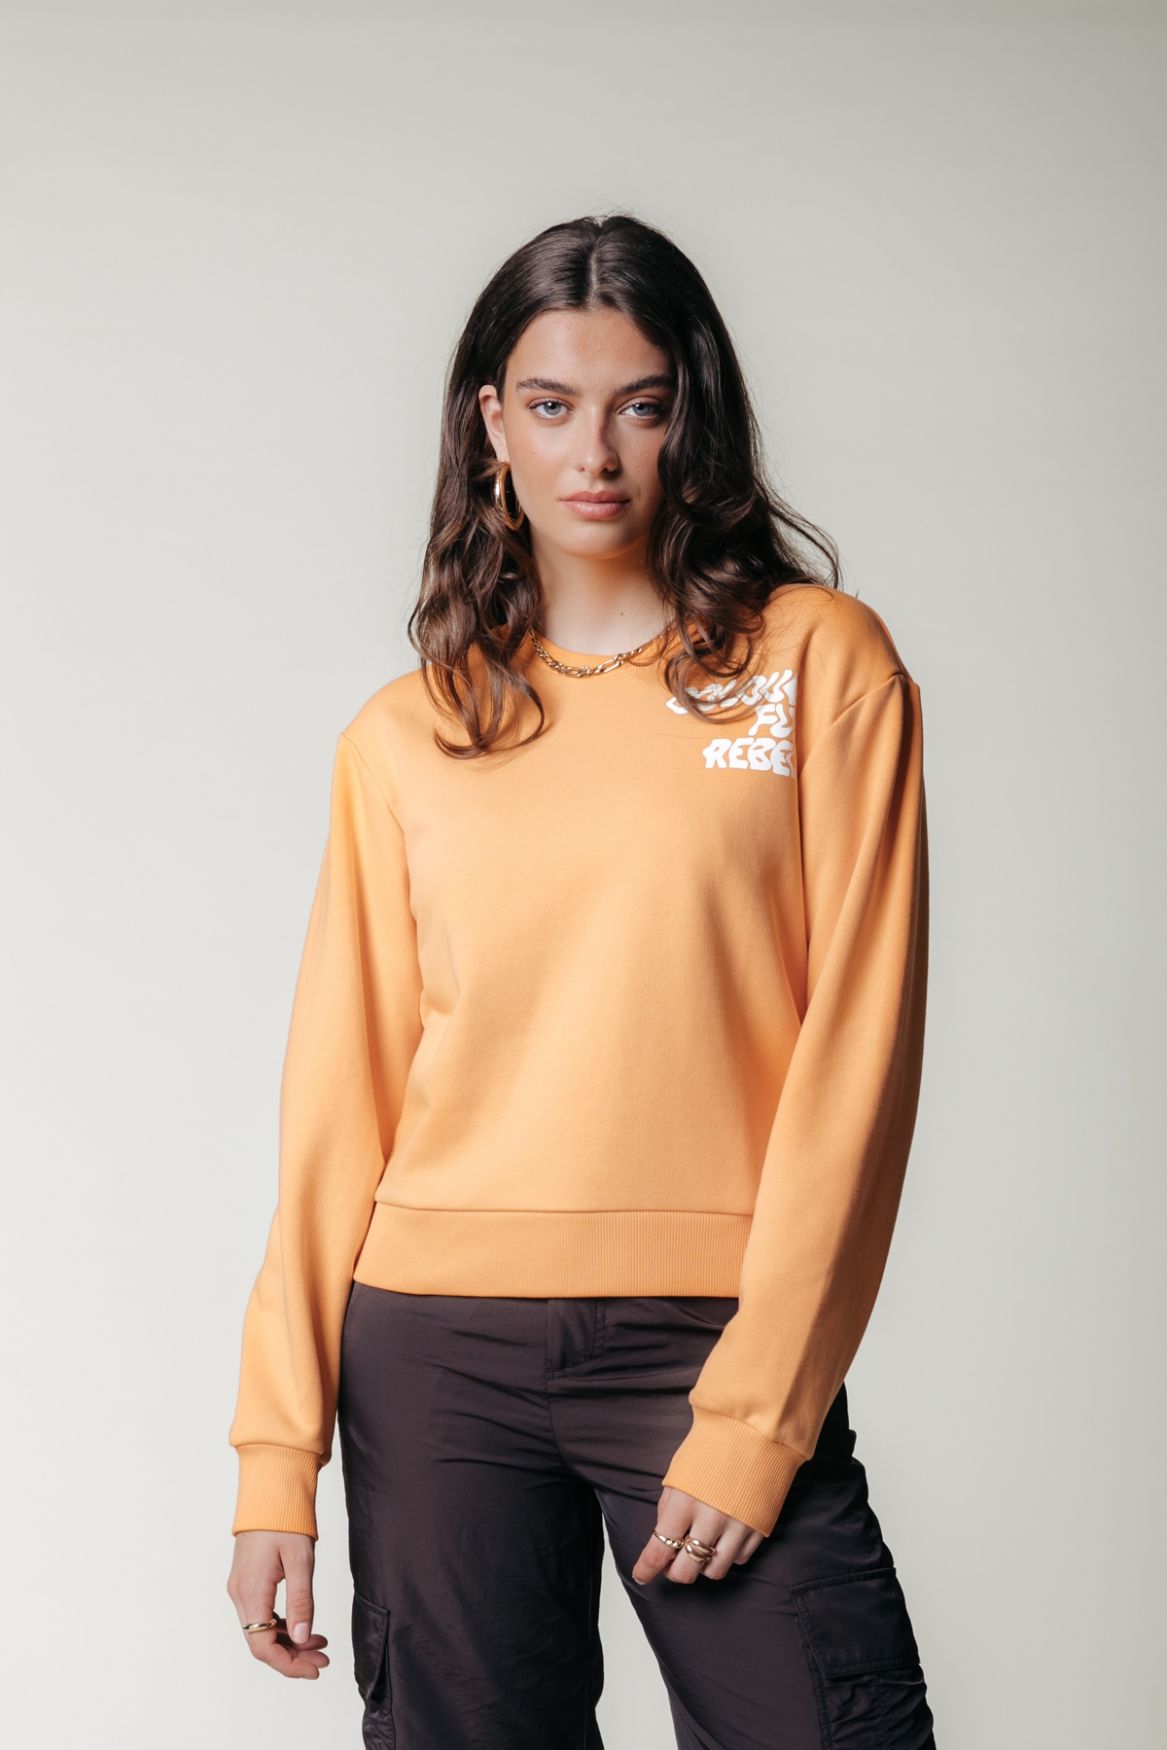 Colourful Rebel Logo Wave Relaxed Sweat 725 tangerine 2900145586040